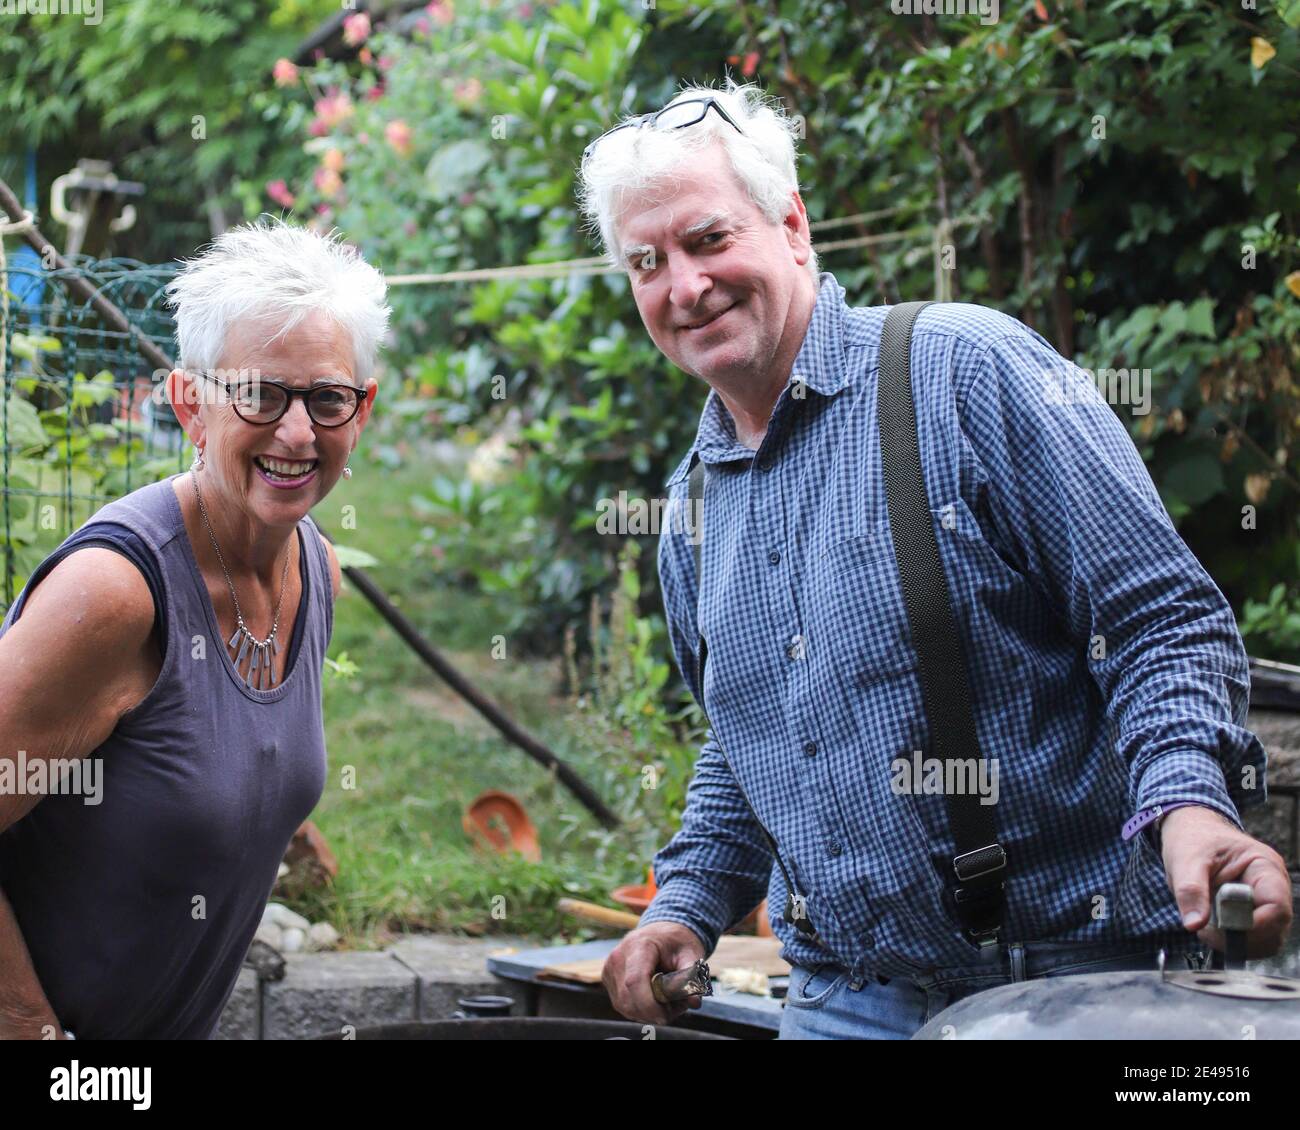 Two white haired, bespectacled brother and sister in a Belgium garden Stock Photo